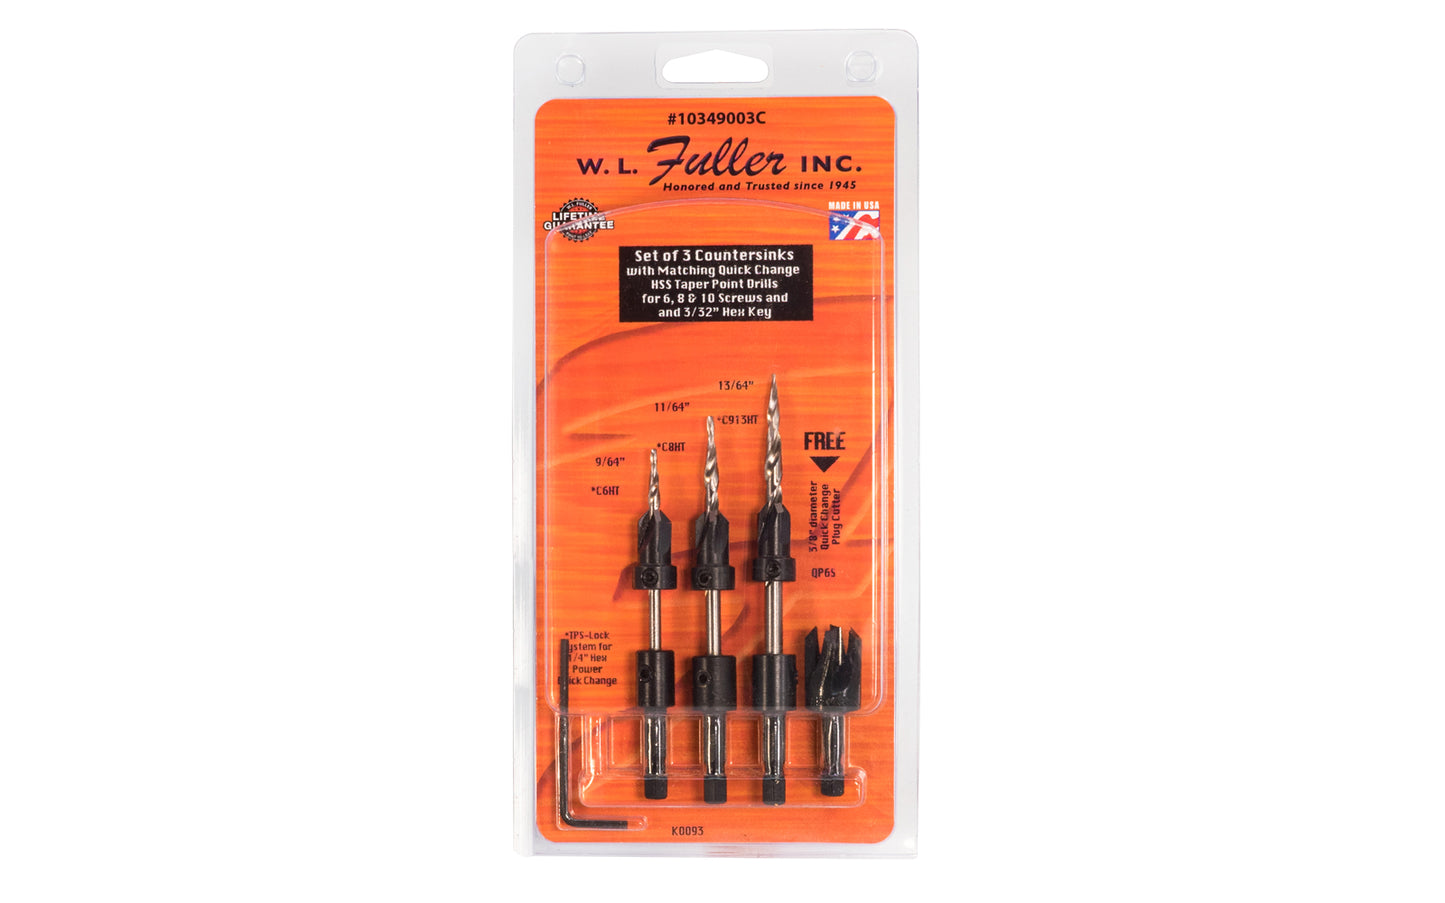 WL Fuller 3-piece countersink set with 3/8" plug cutter. Model 10349003C ~ With matching quick change HSS taper point drills for #6, #8, & #10 screws. Countersink is made of carbon steel & heat-treated for long life ~ Countersink & counterbore the heads of screws ~ Use in all woods & plastics - 82° cutting angle head